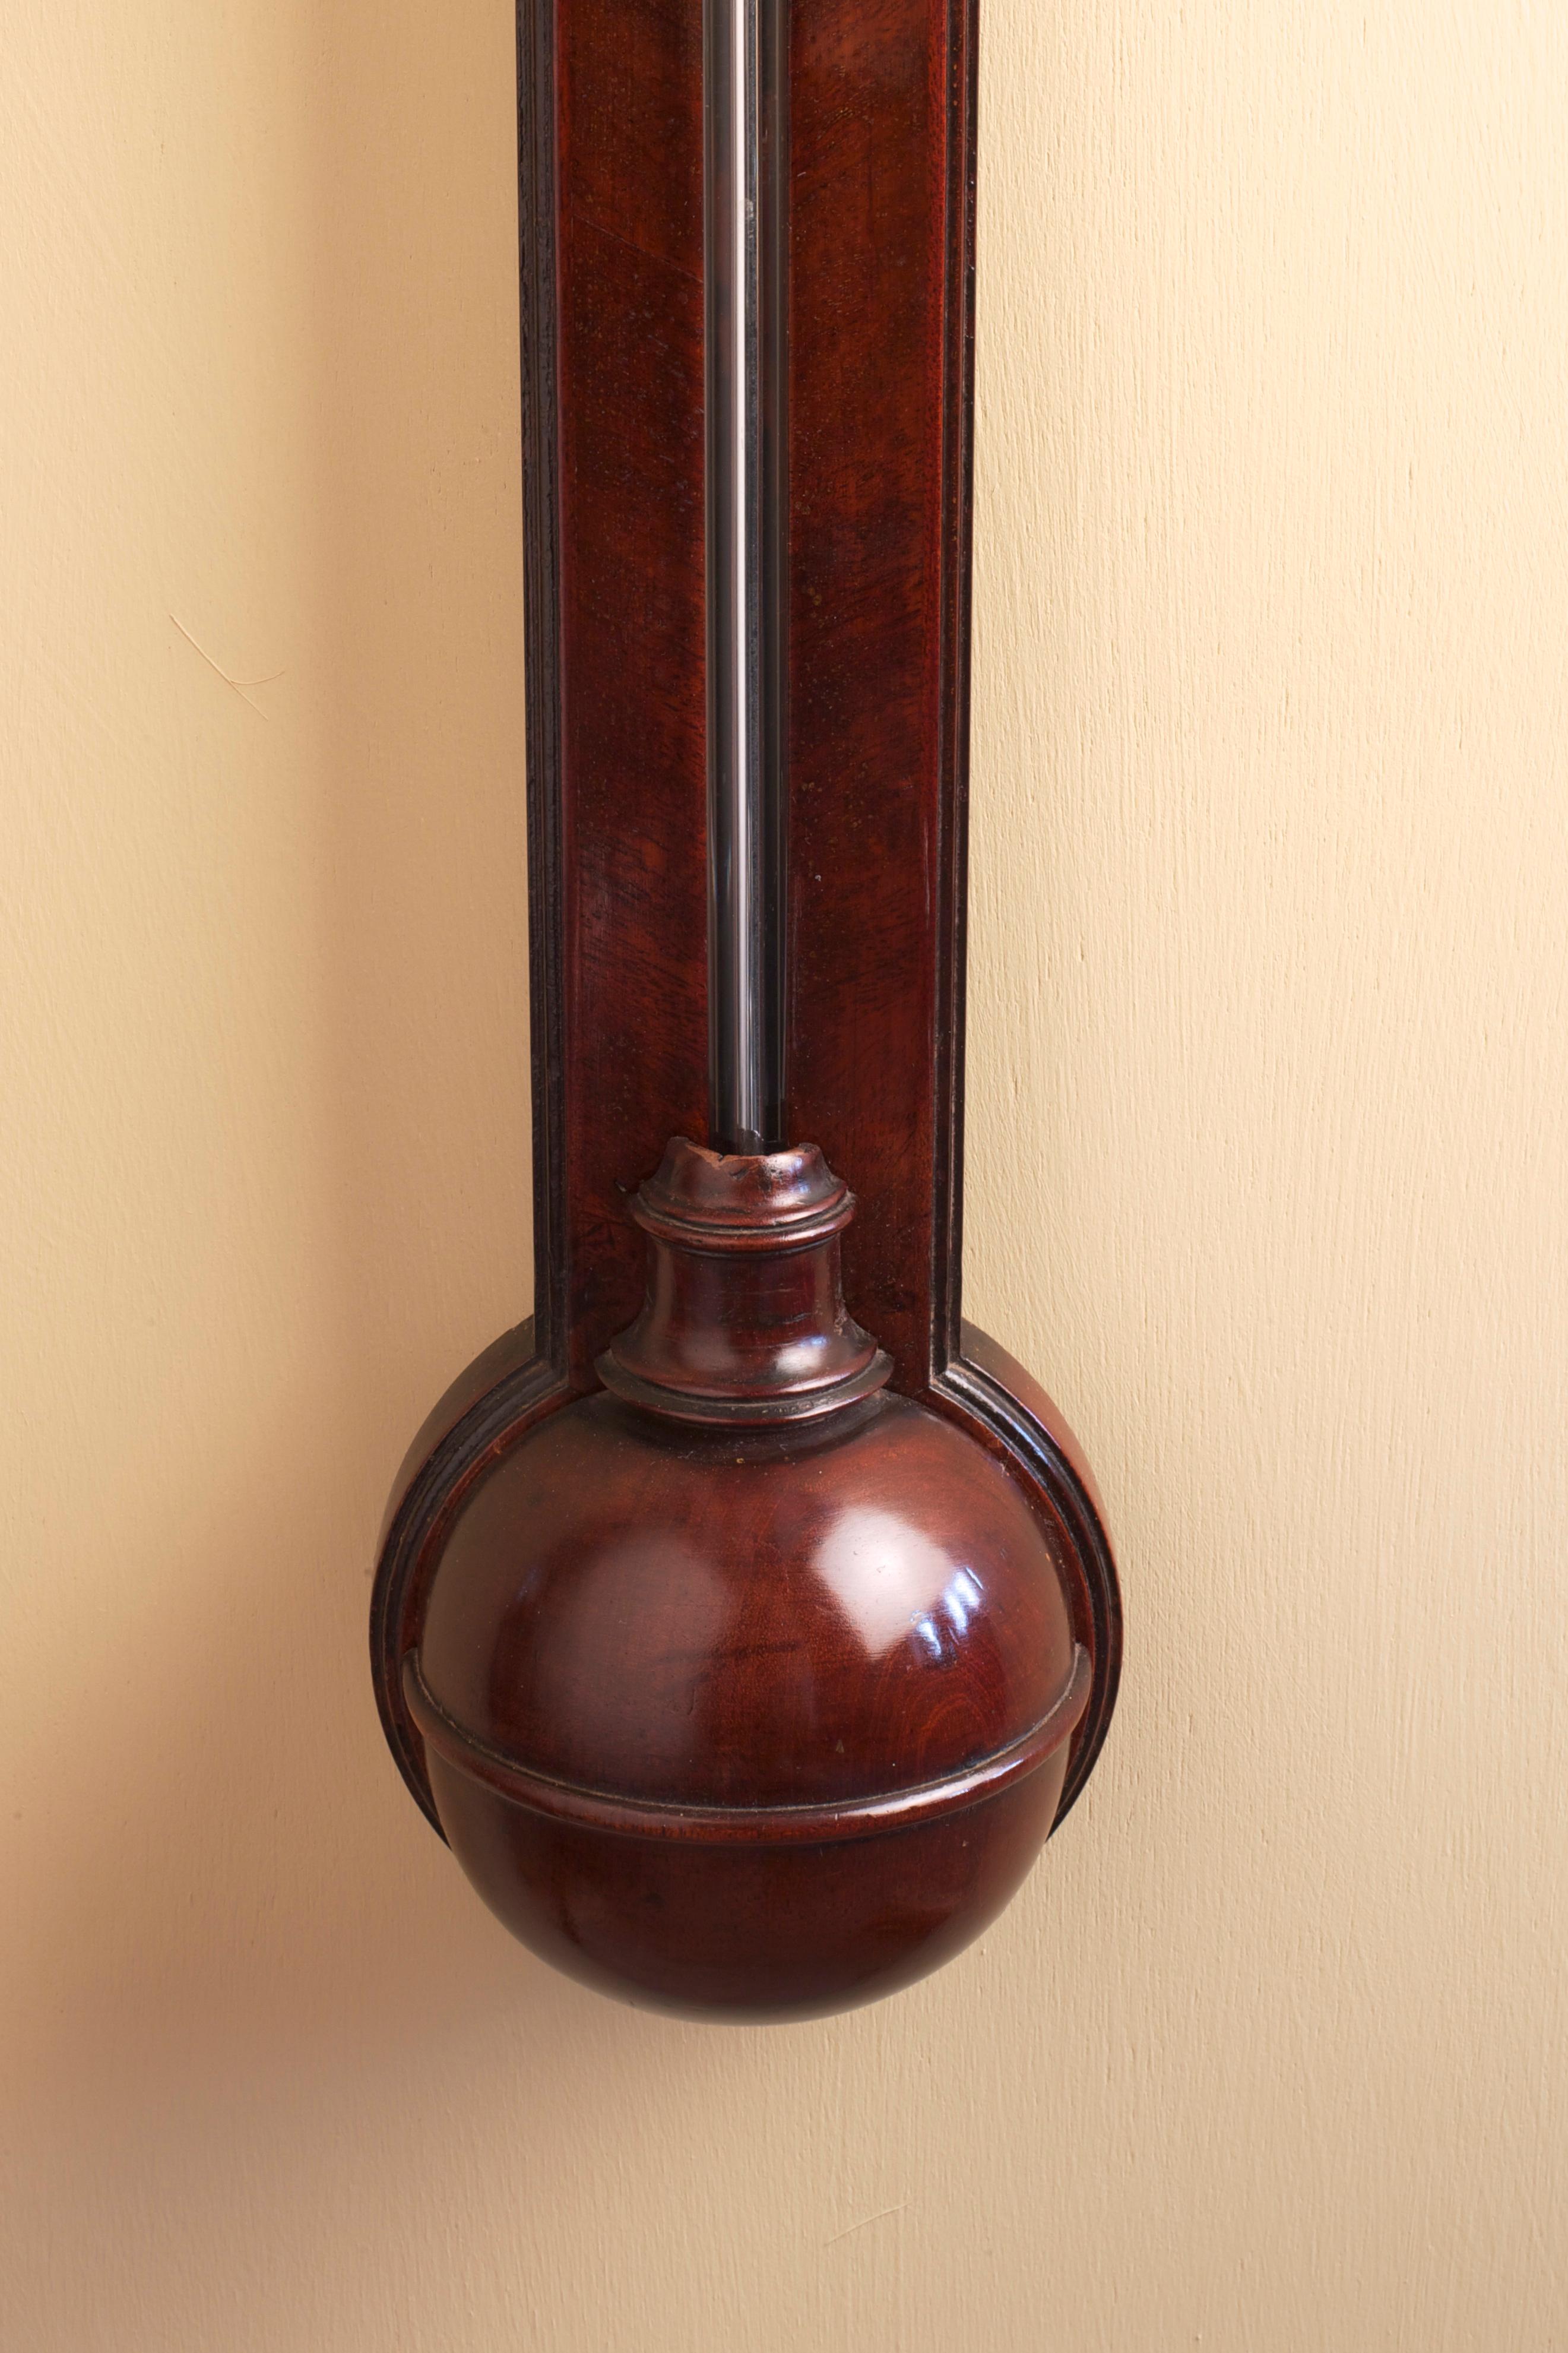 George III stick barometer in a finely figured mahogany case with canted corners and architectural pediment surmounted by a central ivory finial. Exposed mercury tube with bulb cistern and bulbous cistern cover. Beautifully engraved register plate